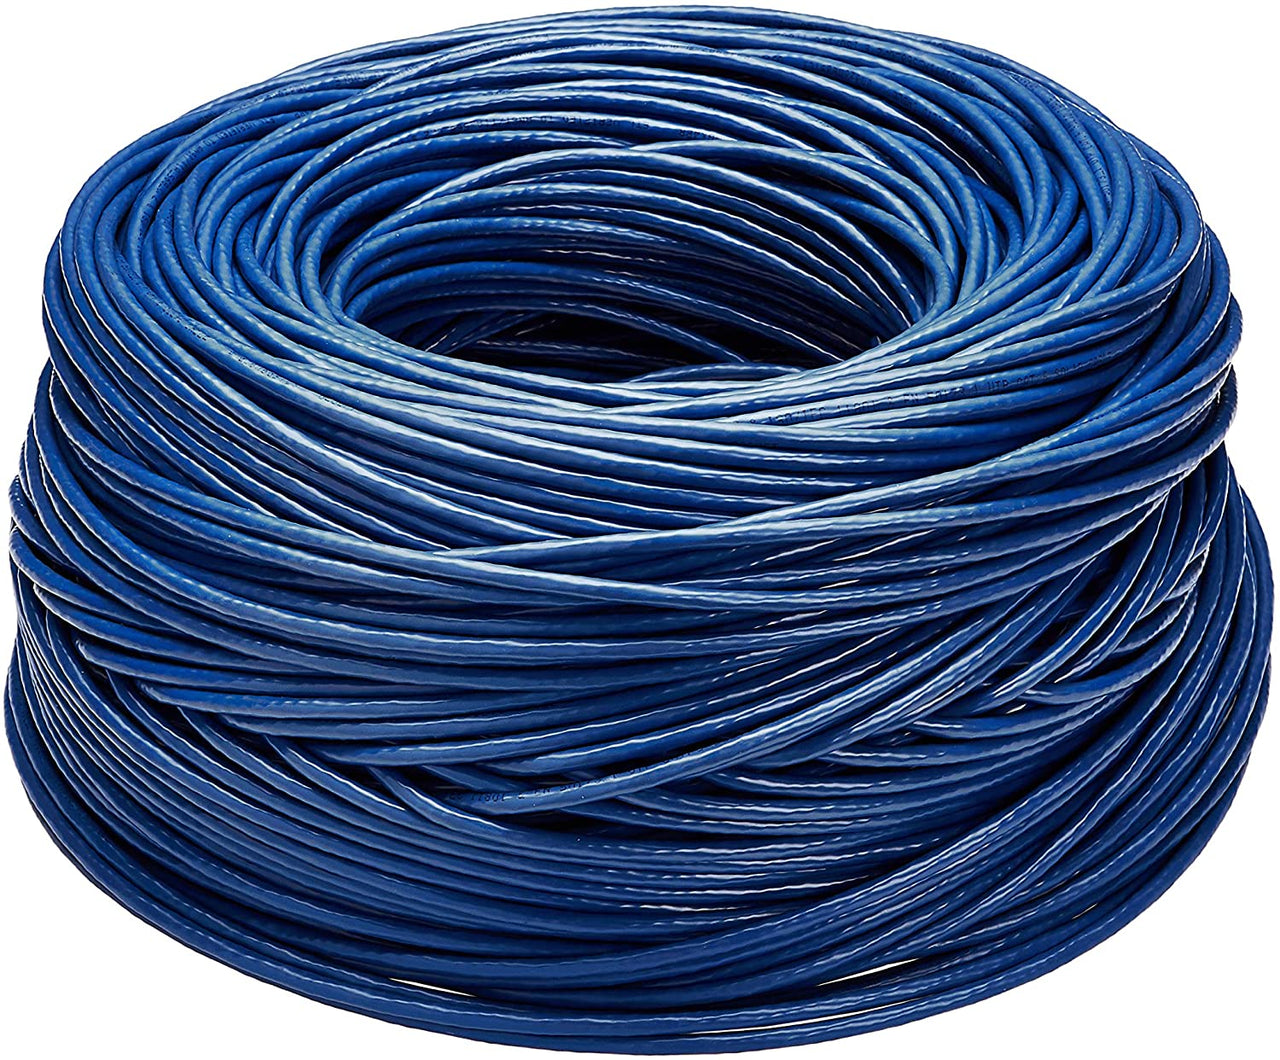 Absolute 1000' Cat6 Ethernet Blue Bulk Network Cable<br/> 23AWG 600Mhz UL Bare Solid Copper Wire UTP 1000' Blue